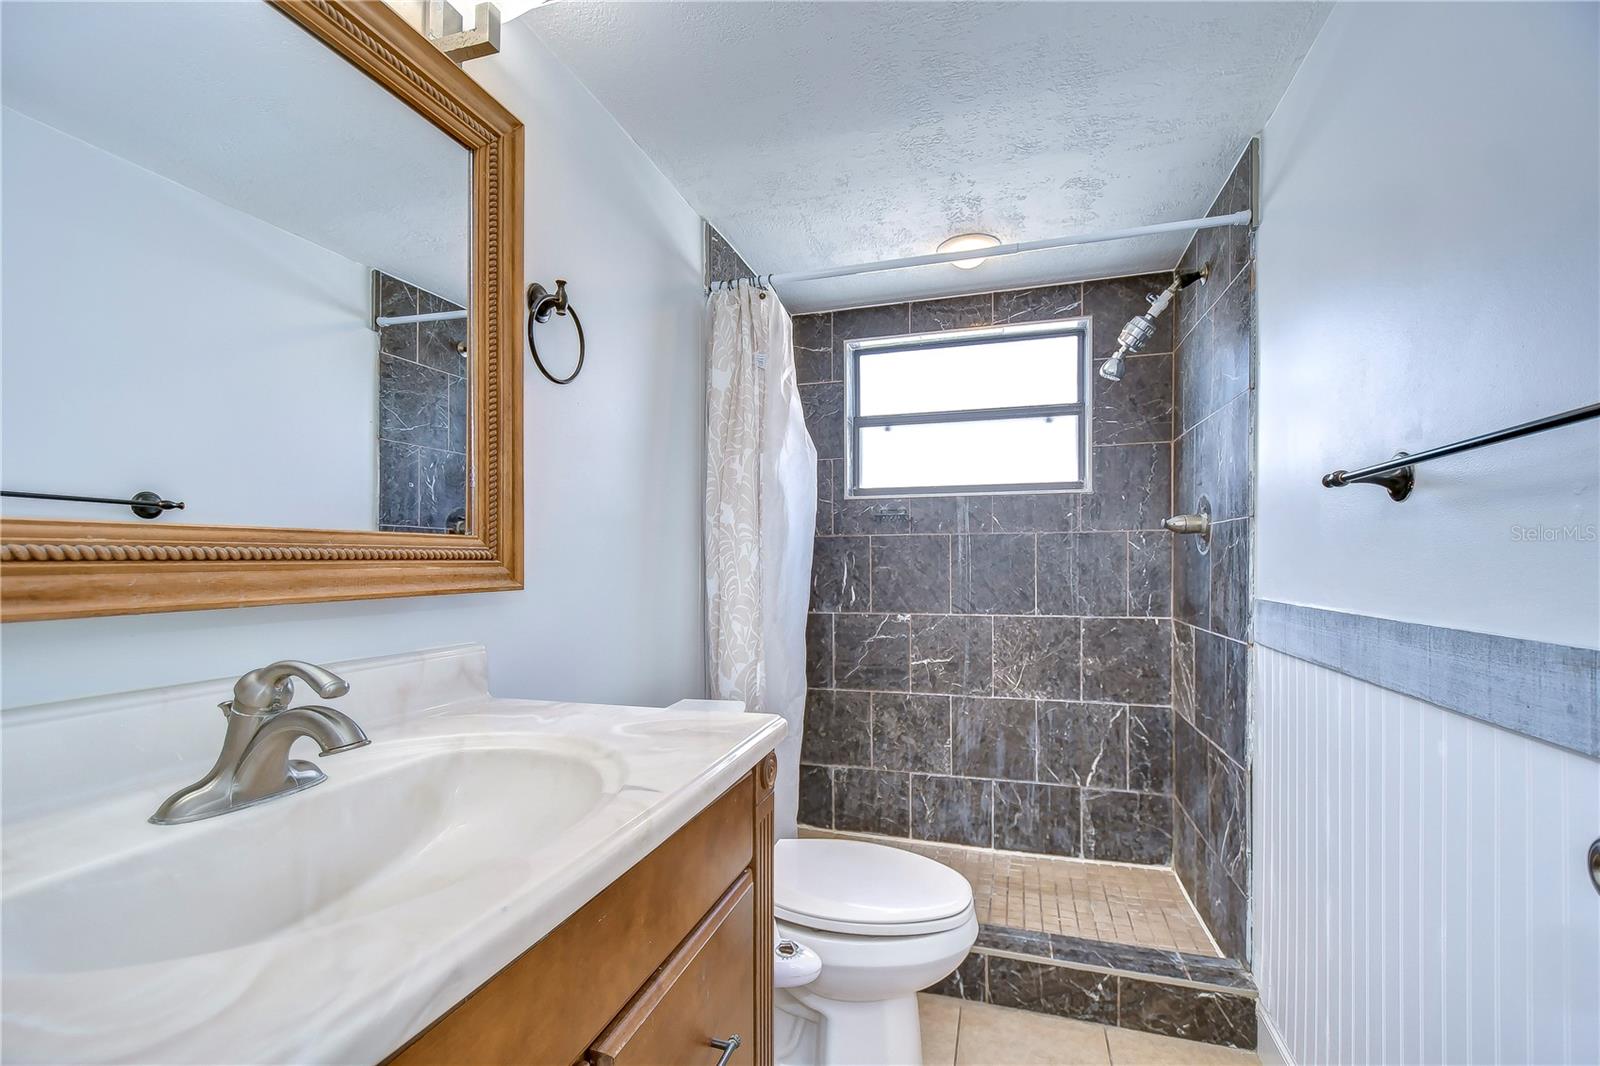 Primary bath with spacious shower!